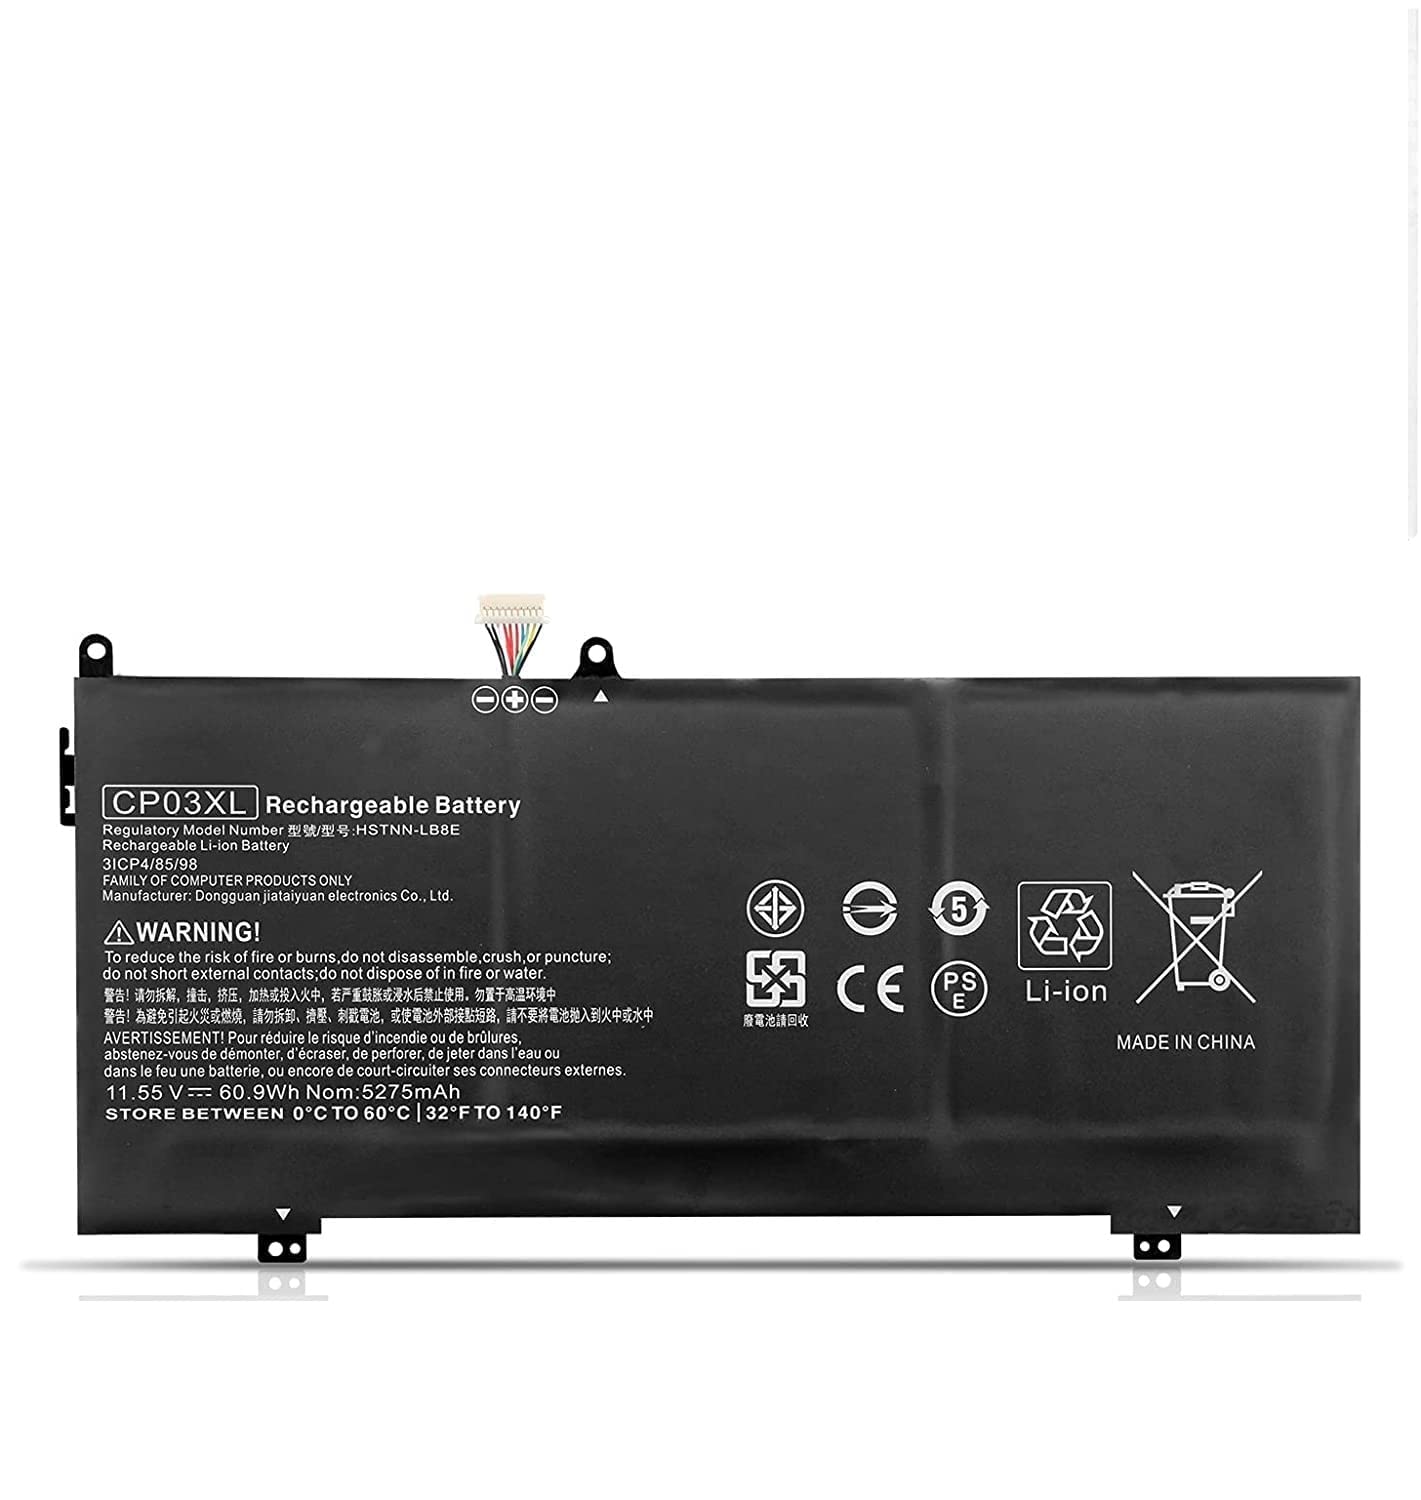 WISTAR HP CP03XL Battery Replacement for HP Spectre X360 13-ae Series 929066-421 929072-855 TPN-Q199 11.55V 60.9Wh 5275mAh